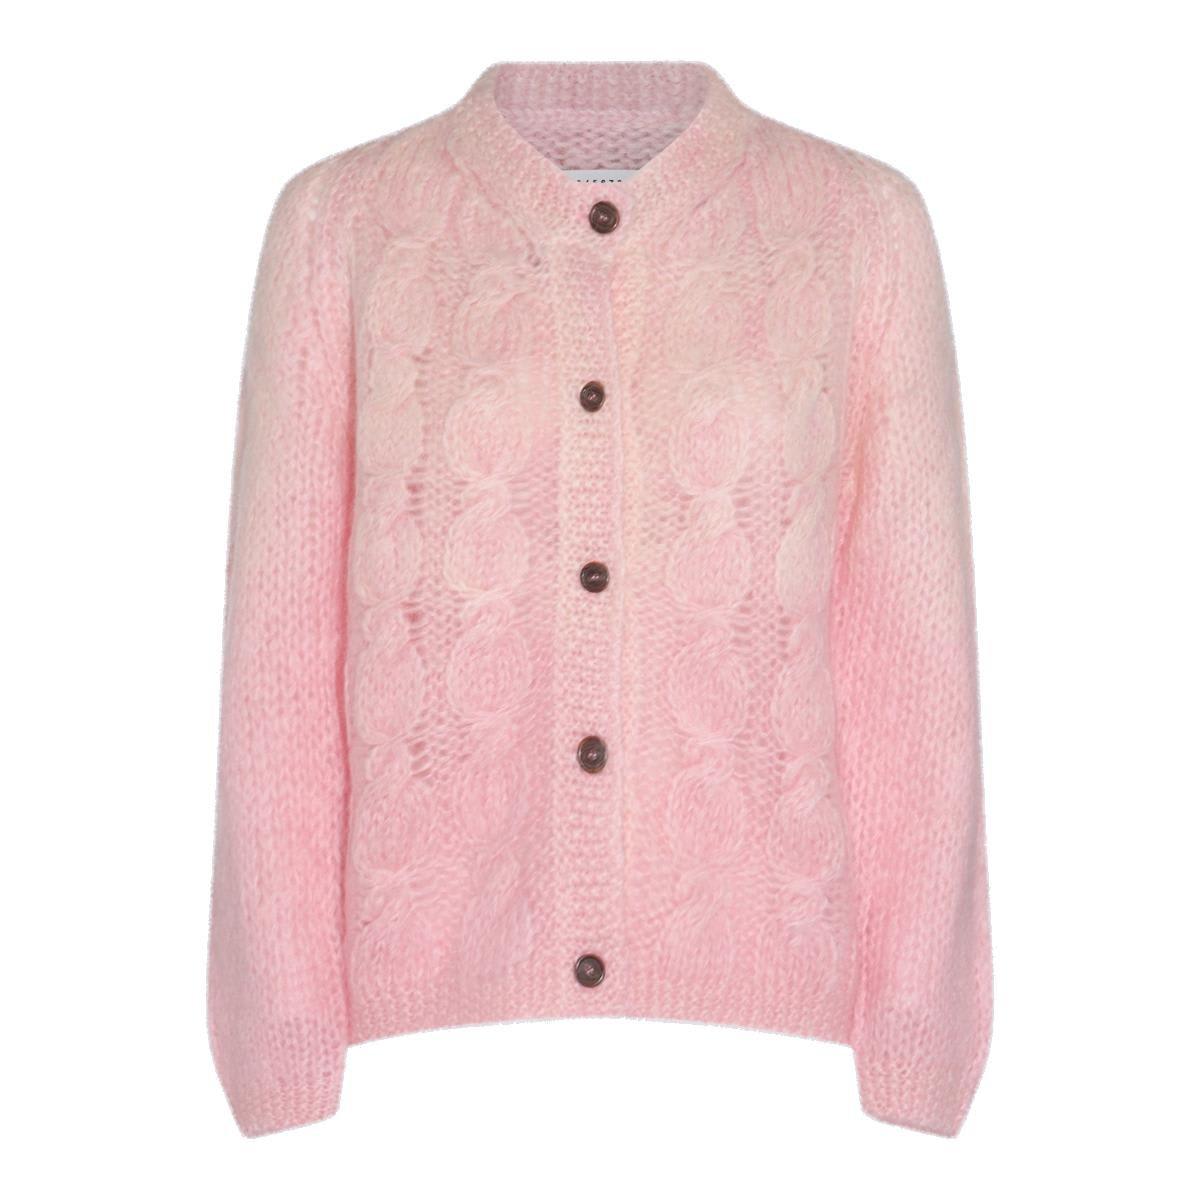 Maison Margiela Buttoned Down Knitted Cardigan